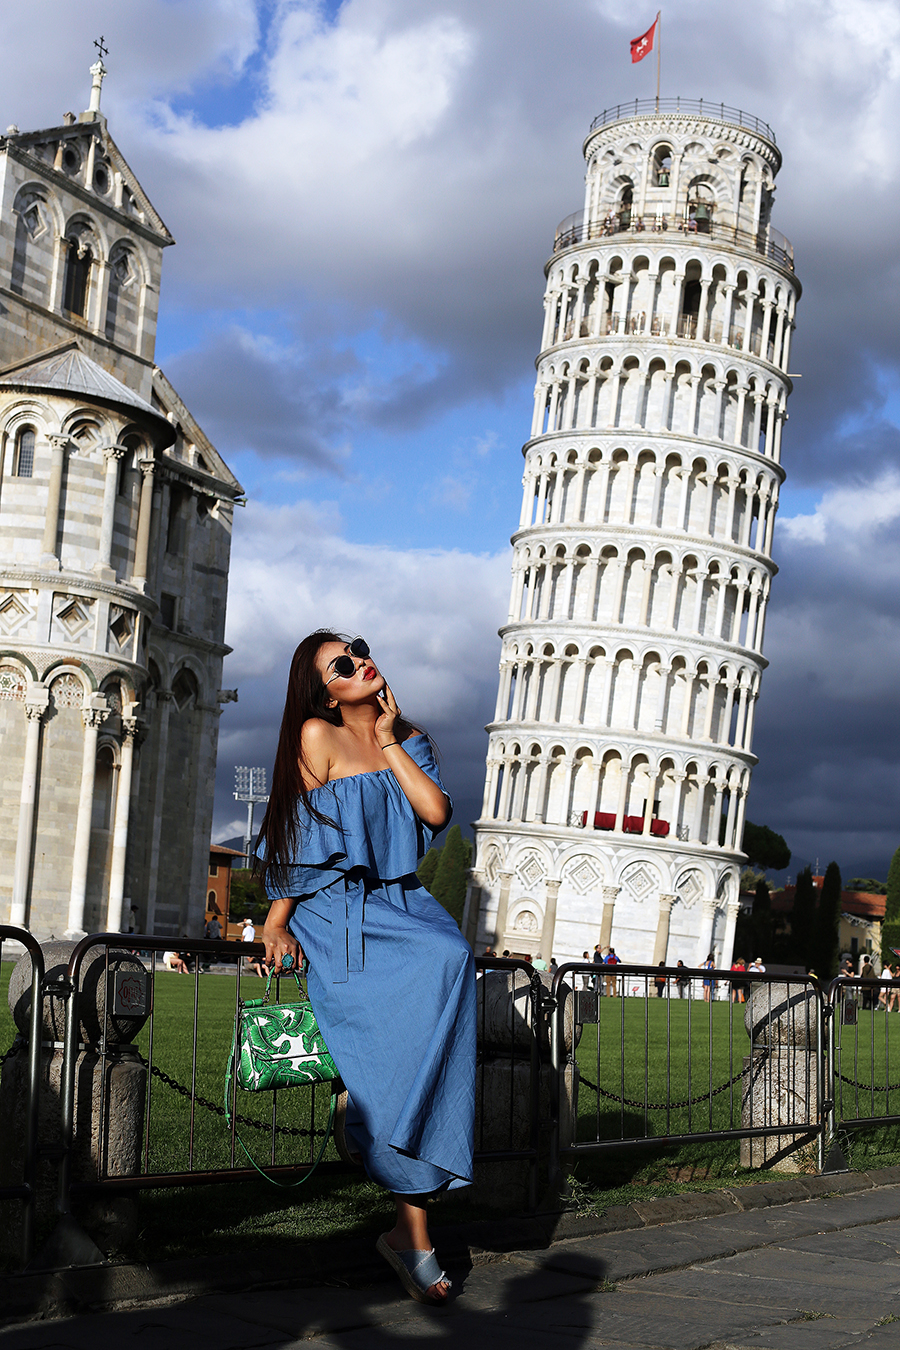 20 Days, 20 Cities, 6 Countries - Part 11: Tuscan Tales in Florence & Pisa, Italy